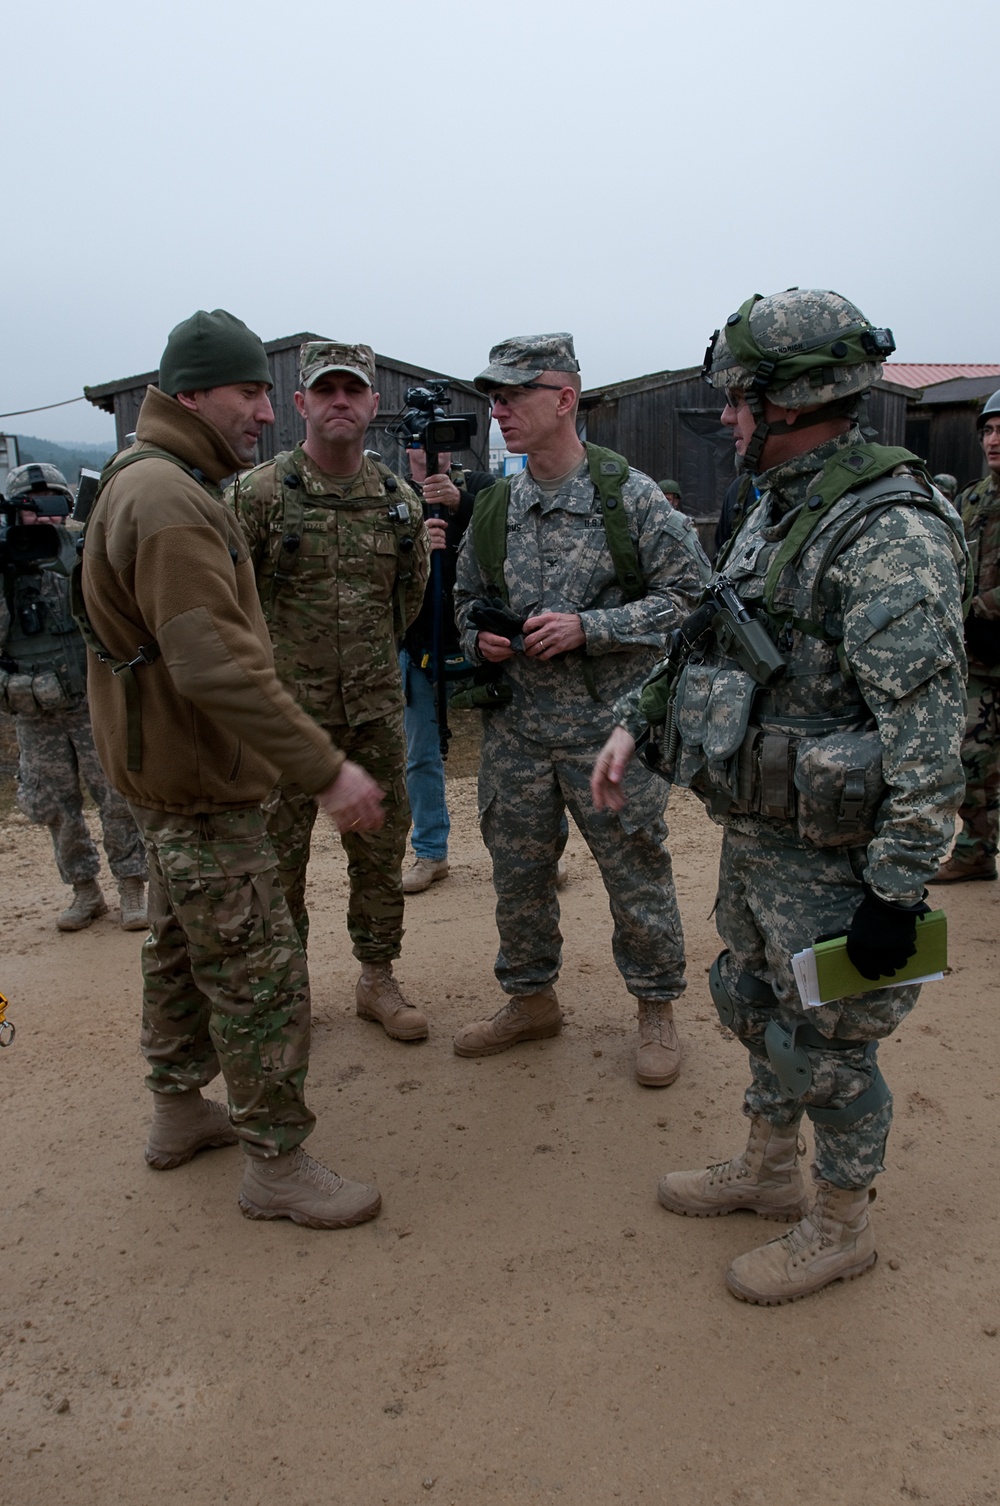 Germany-based US troops to advise and assist Afghans through 2014